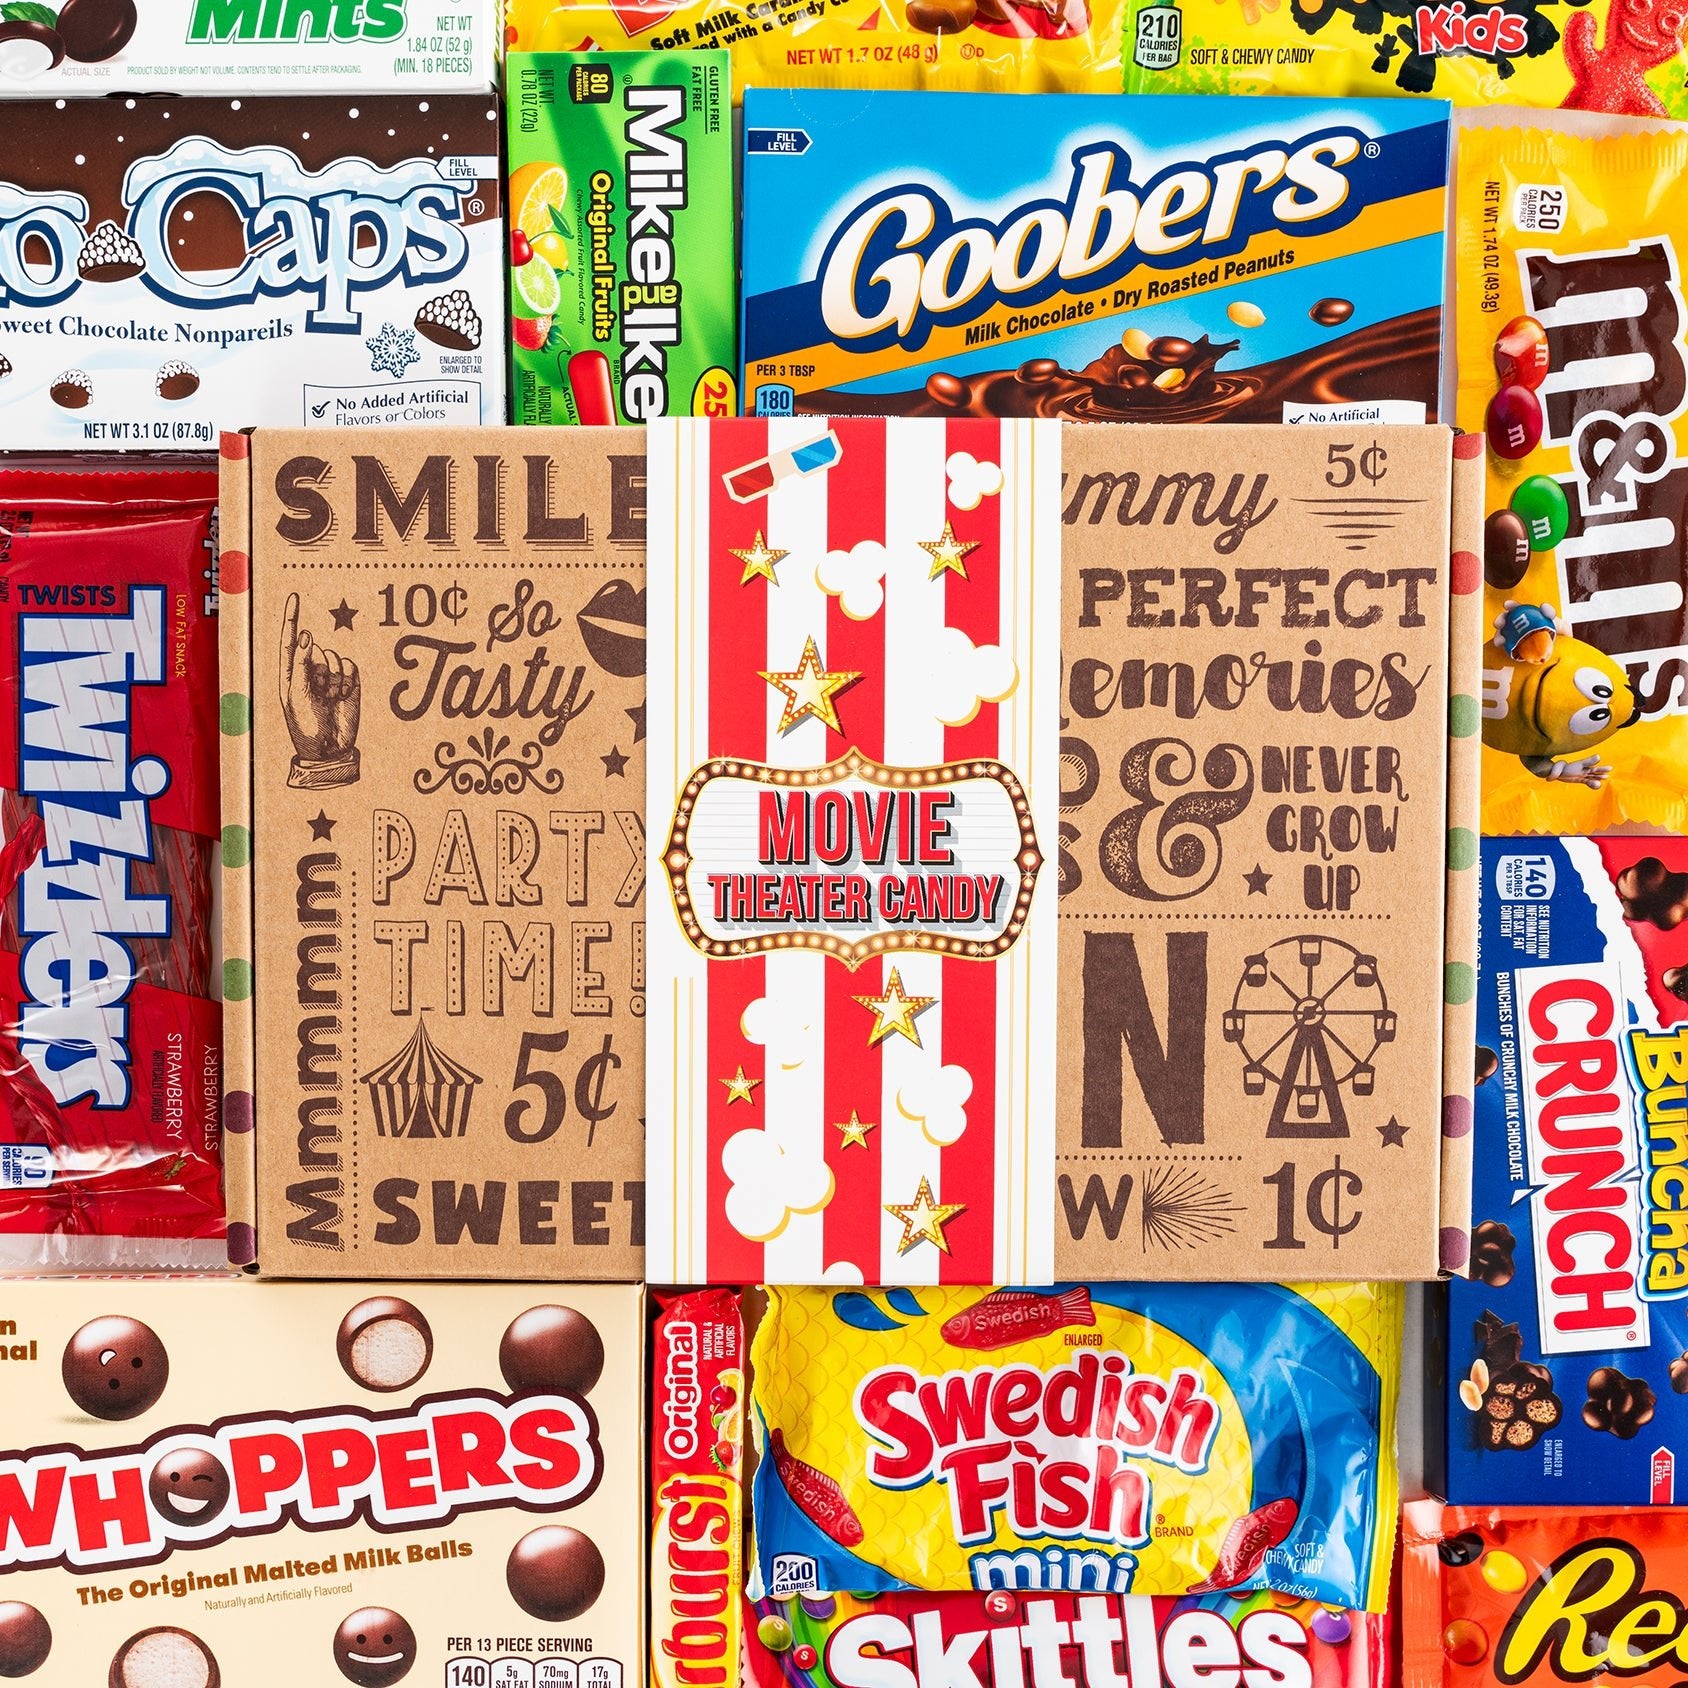 Movie Theater Candy - Vintage Candy Co.